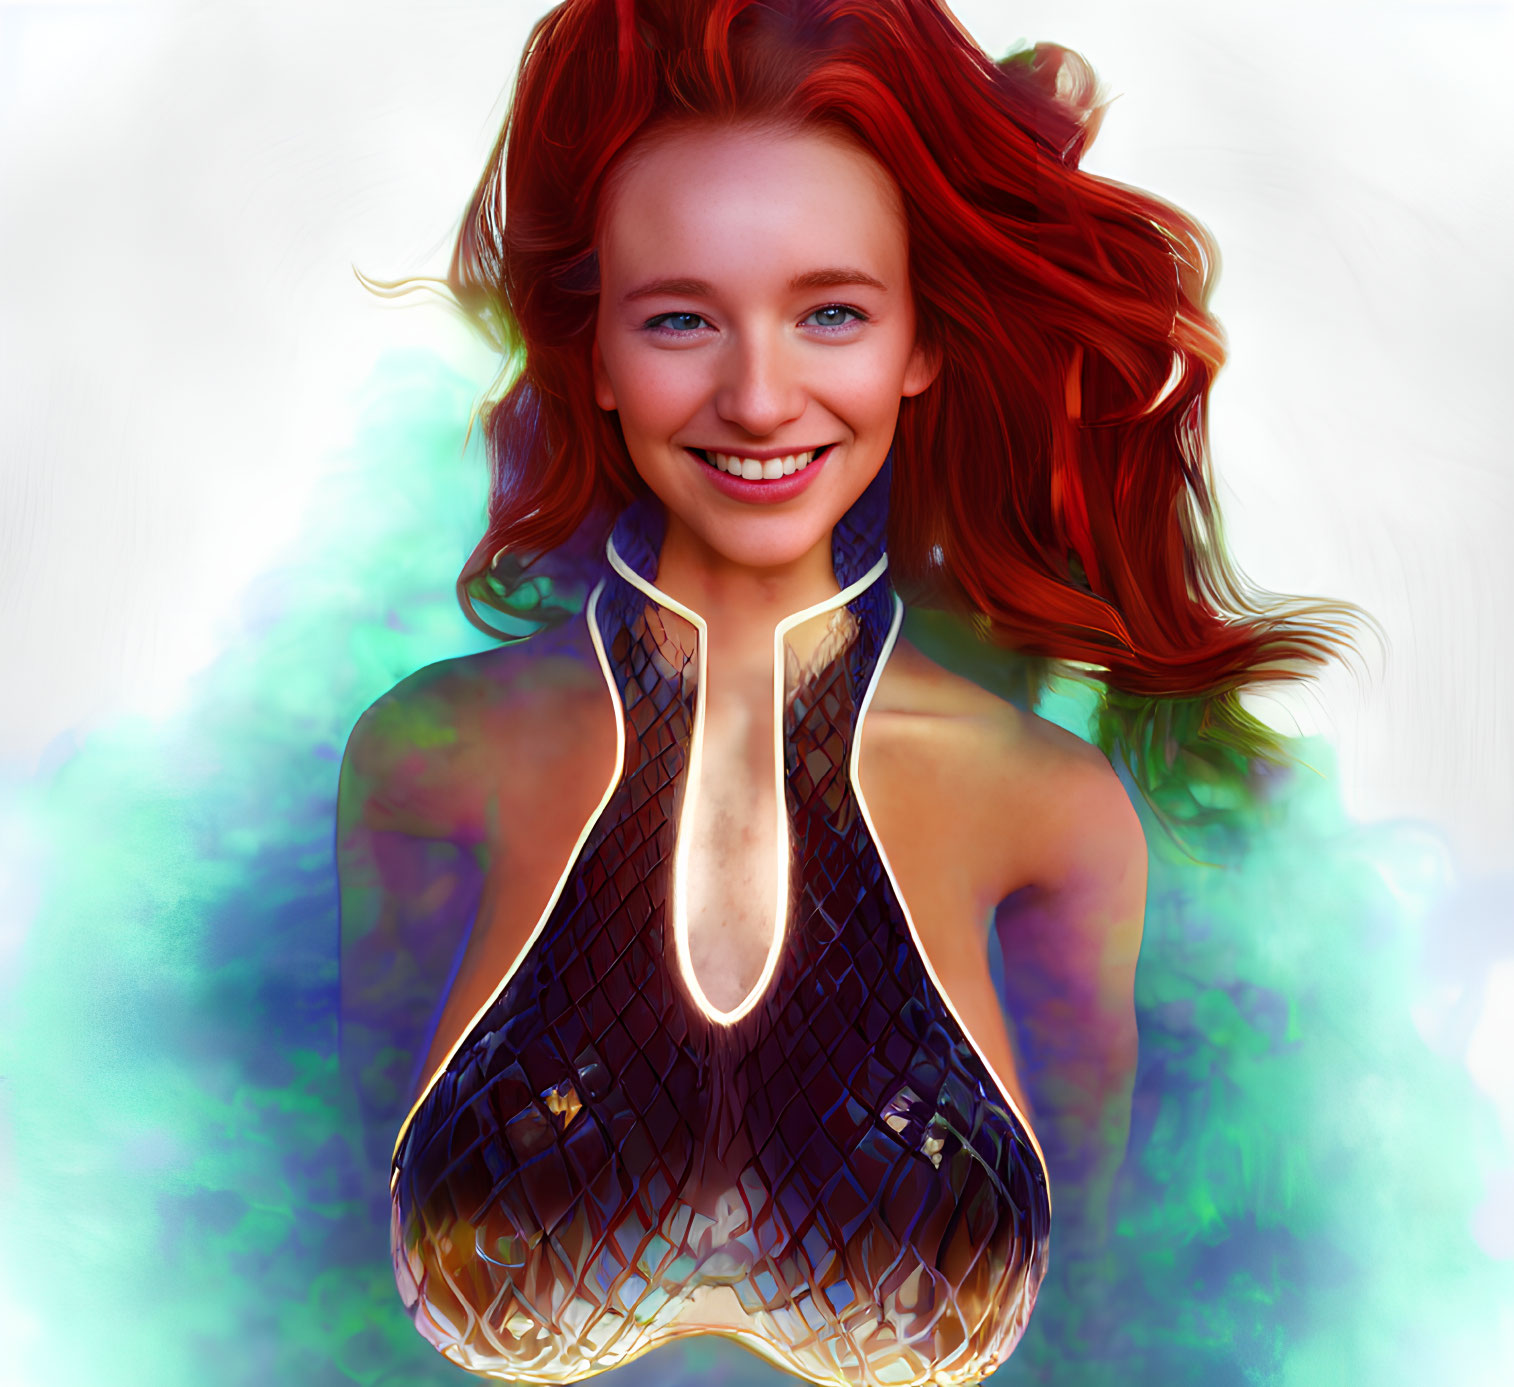 Smiling woman with red hair in futuristic mesh top on colorful abstract background